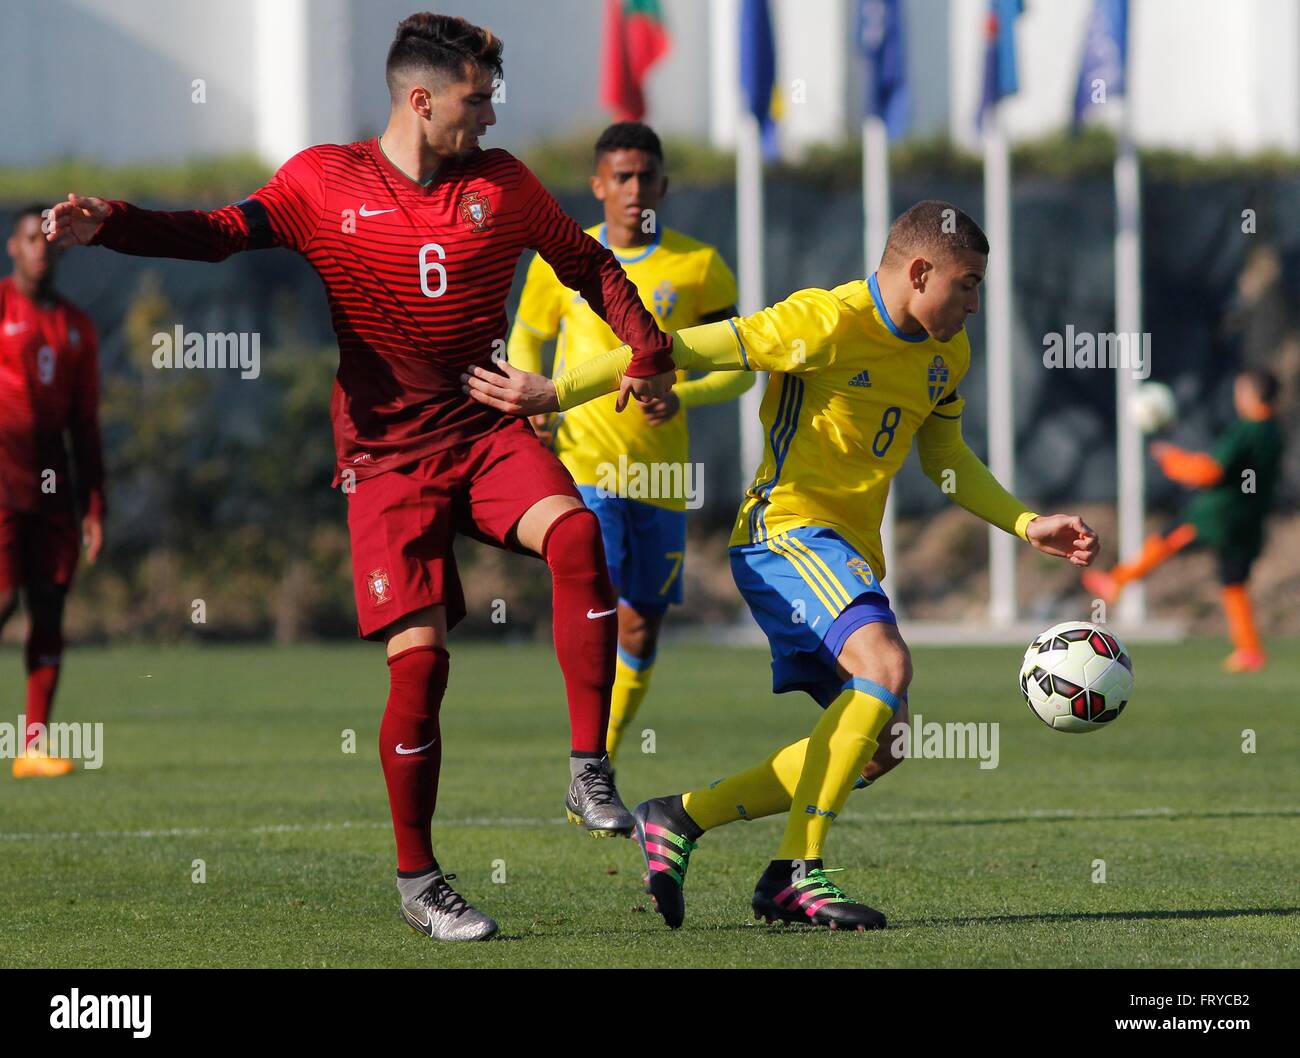 Vila Do Conde, Portugal. 24th Mar, 2016. Pedro Rodrigues of Portugal (Left)  and Jordan Larsson of Sweden in action during their Euro 2016 Under-19  Elite qualifying round at Rio Ave stadium, where